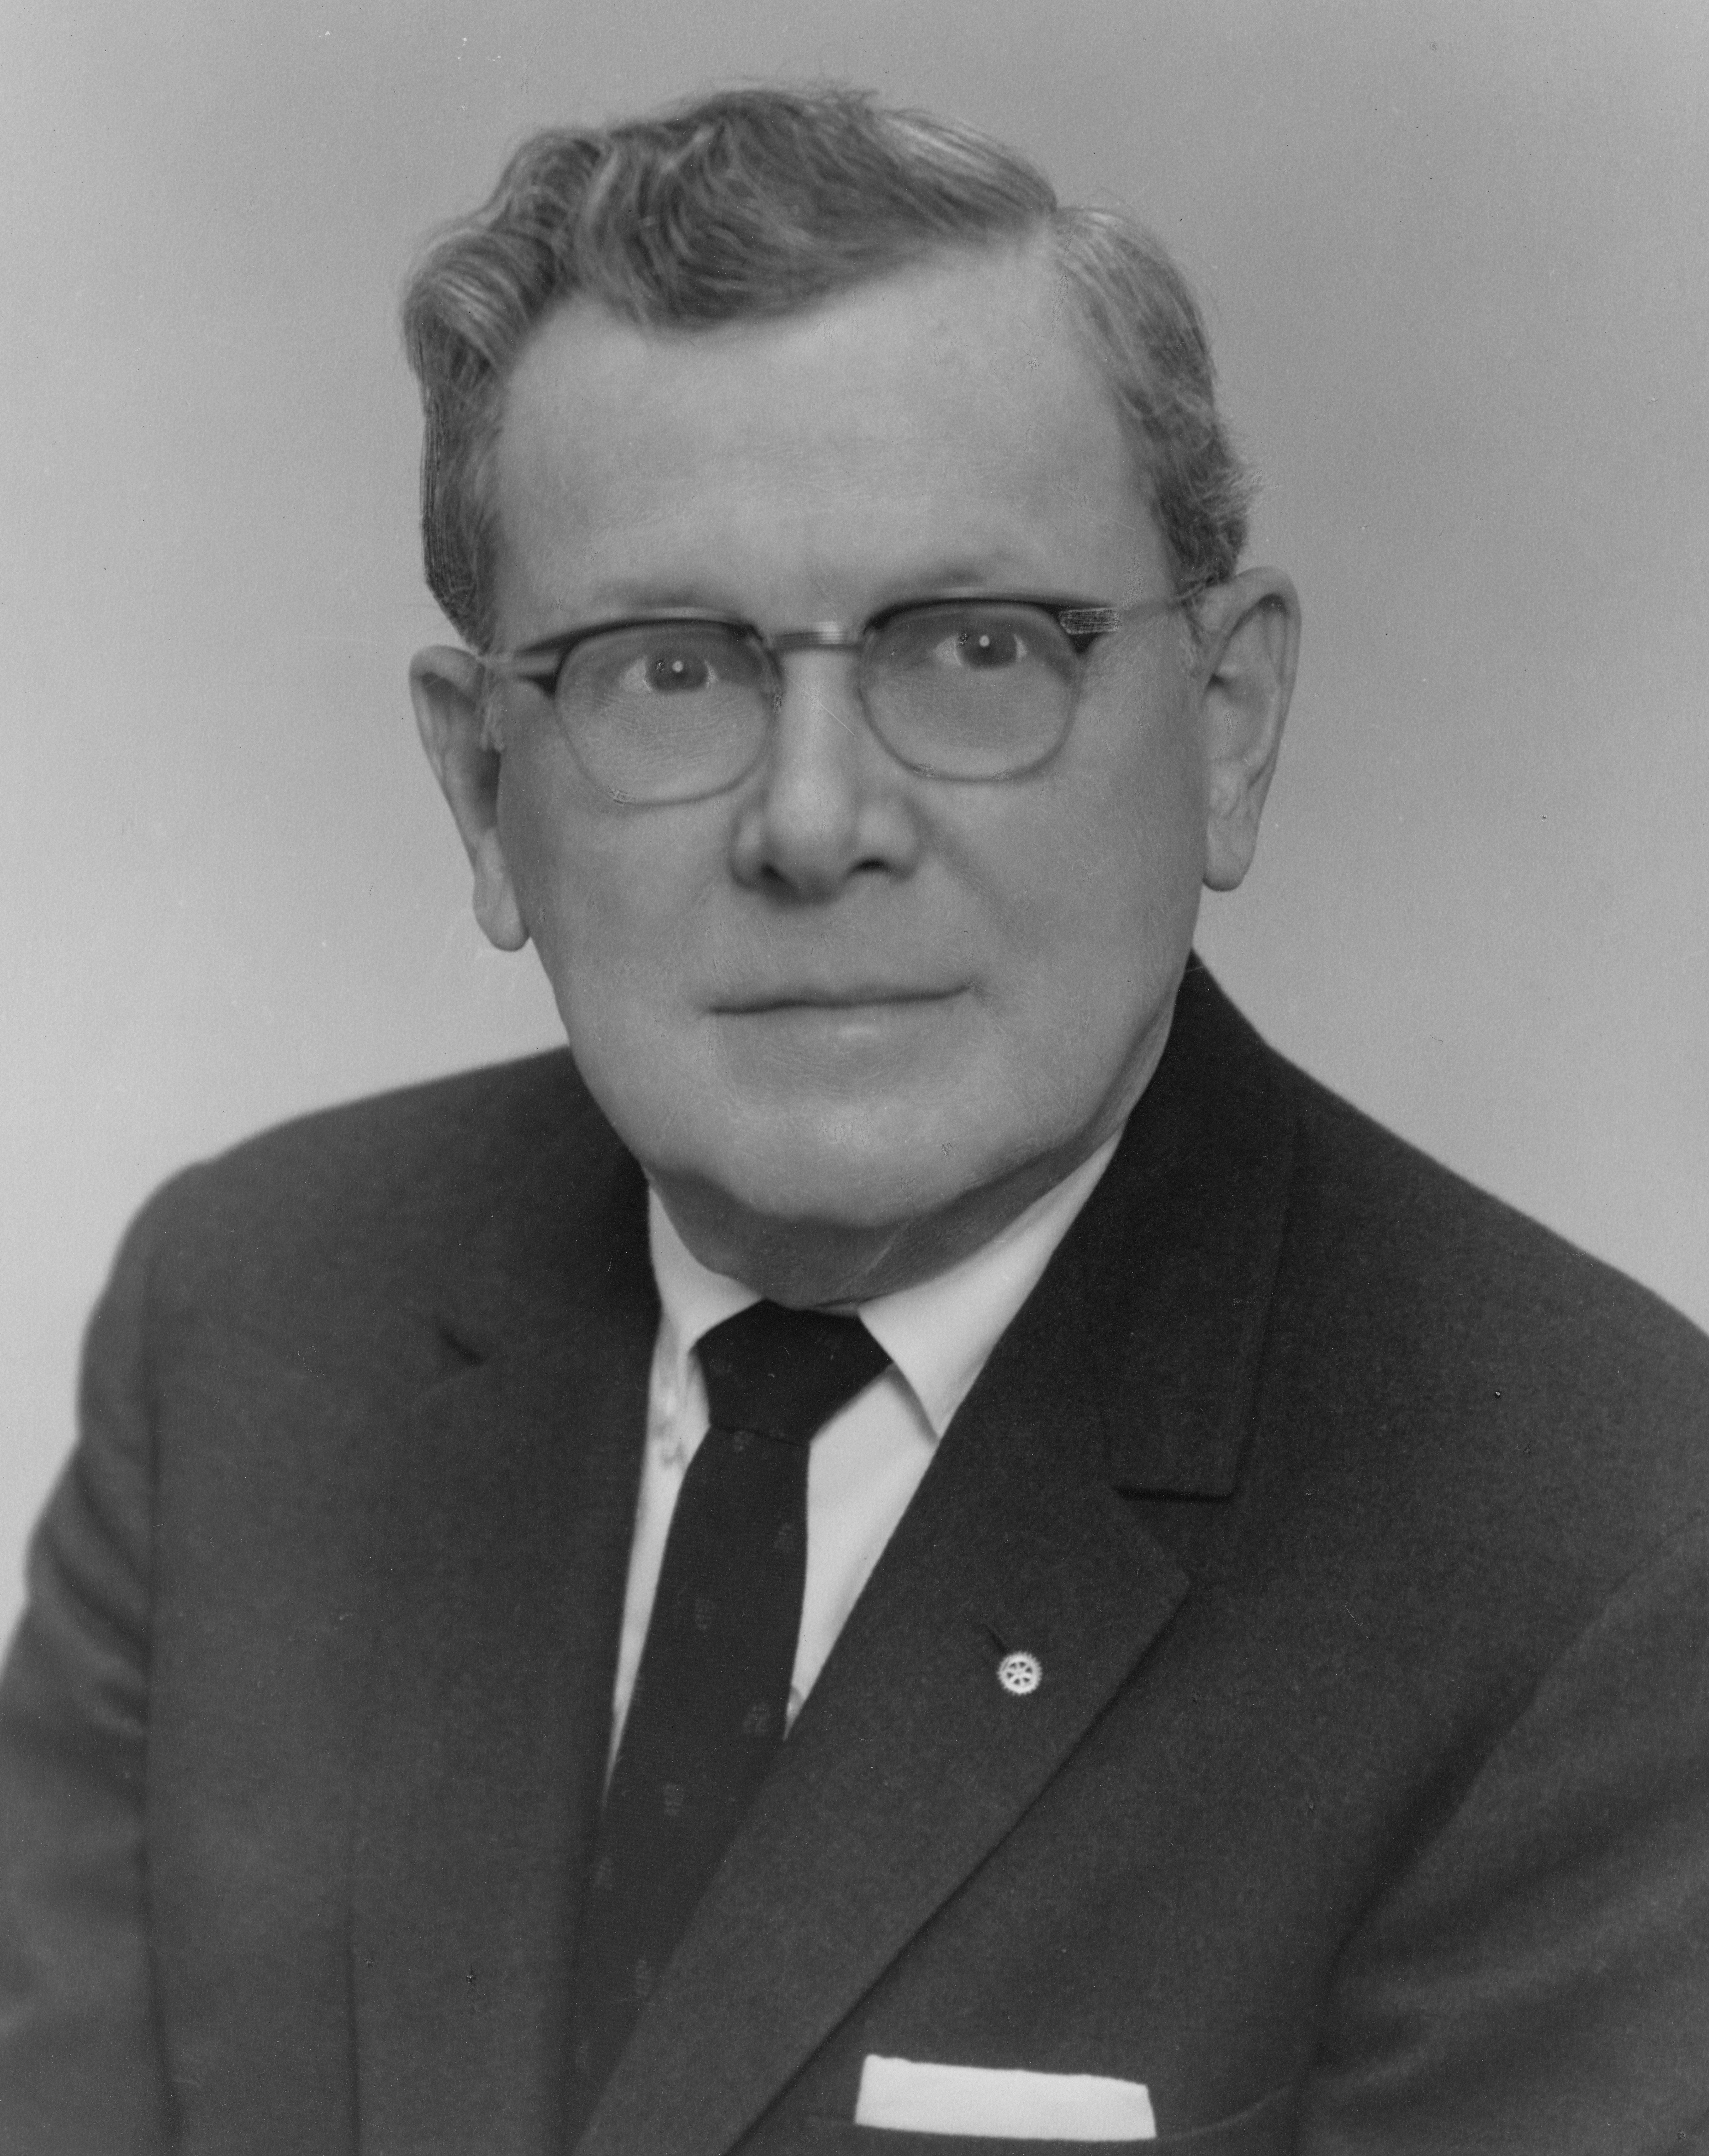 Horace Gray Williams